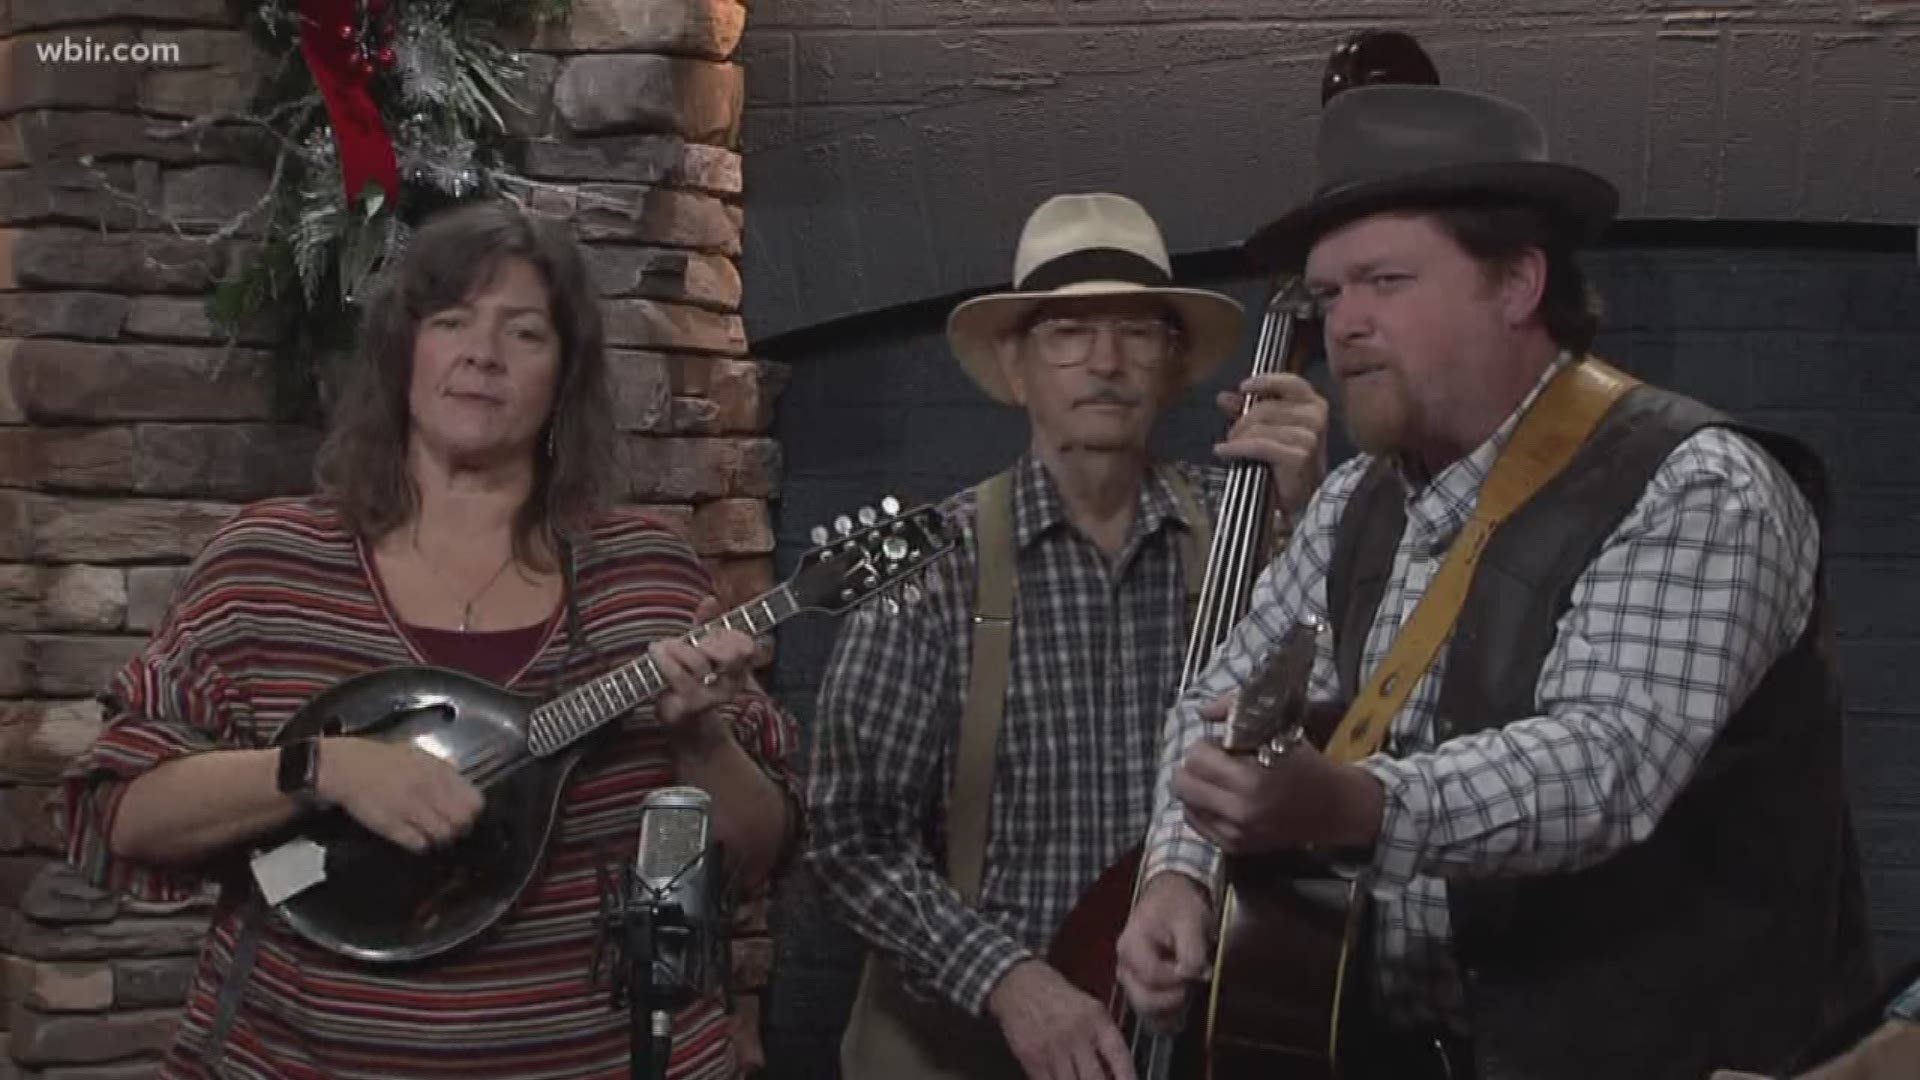 Members of the Museum of Appalachia house band perform Christmas Times's A Comin'. To learn more about the Museum visit museumofappalachia.org. Dec. 14, 2018-4pm